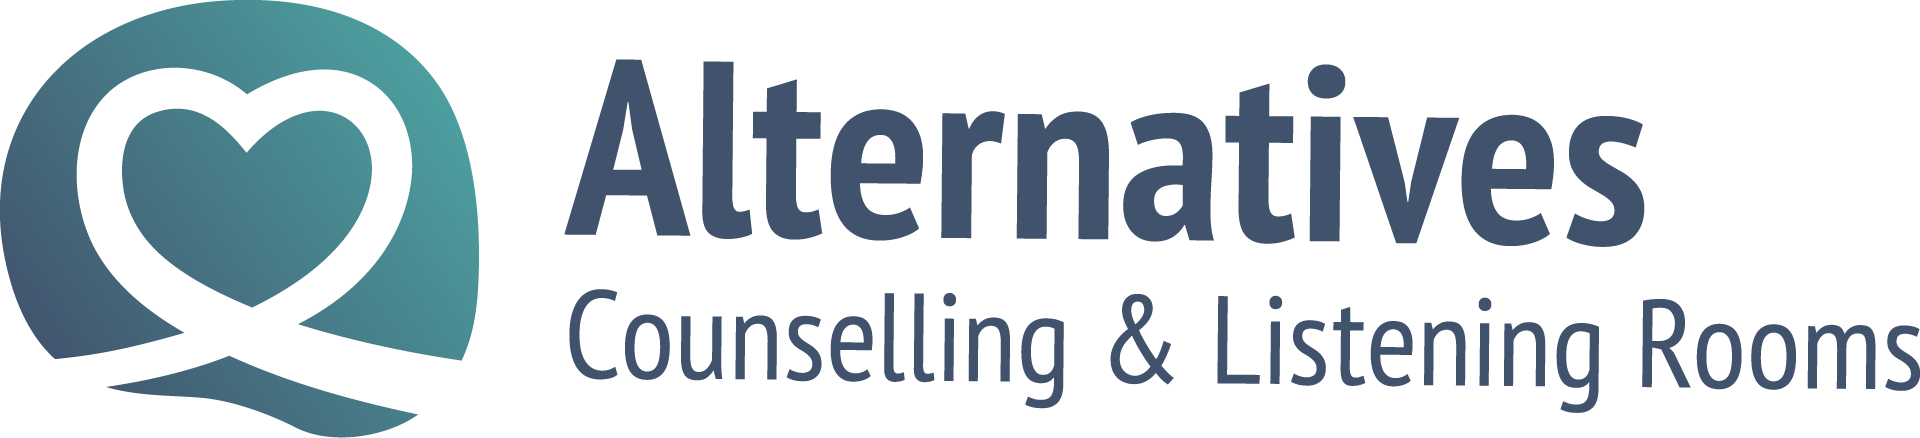 Alternatives Counselling Rooms Logo